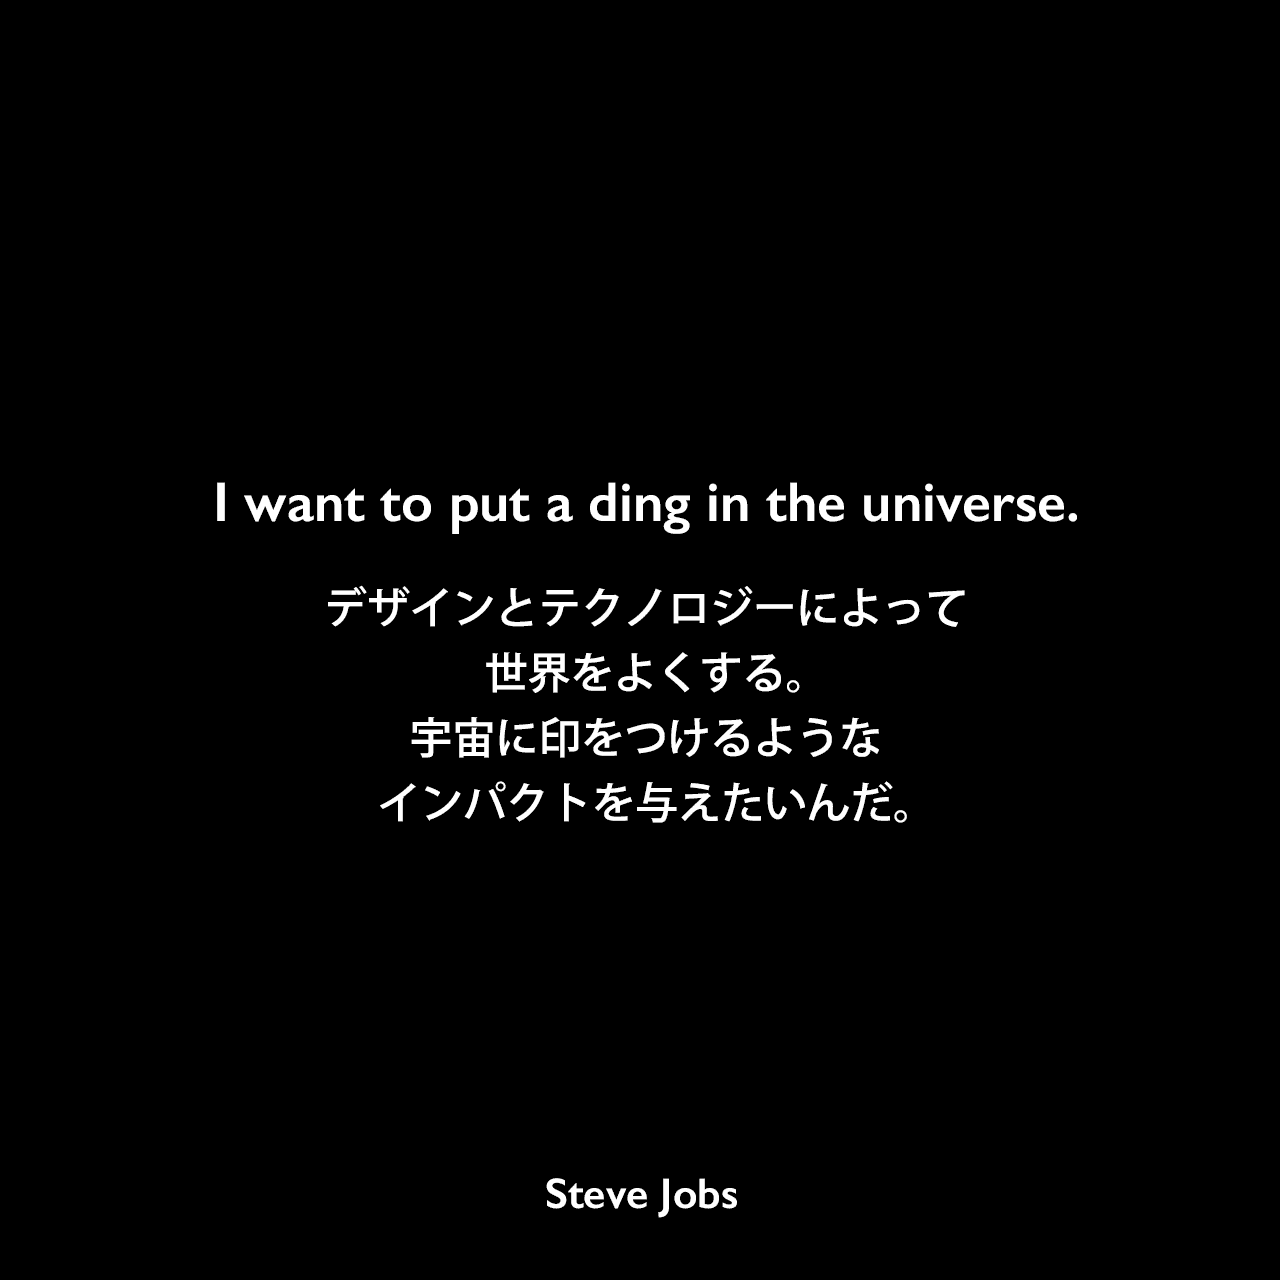 I want to put a ding in the universe.デザインとテクノロジーによって世界をよくする。宇宙に印をつけるようなインパクトを与えたいんだ。Steve Jobs